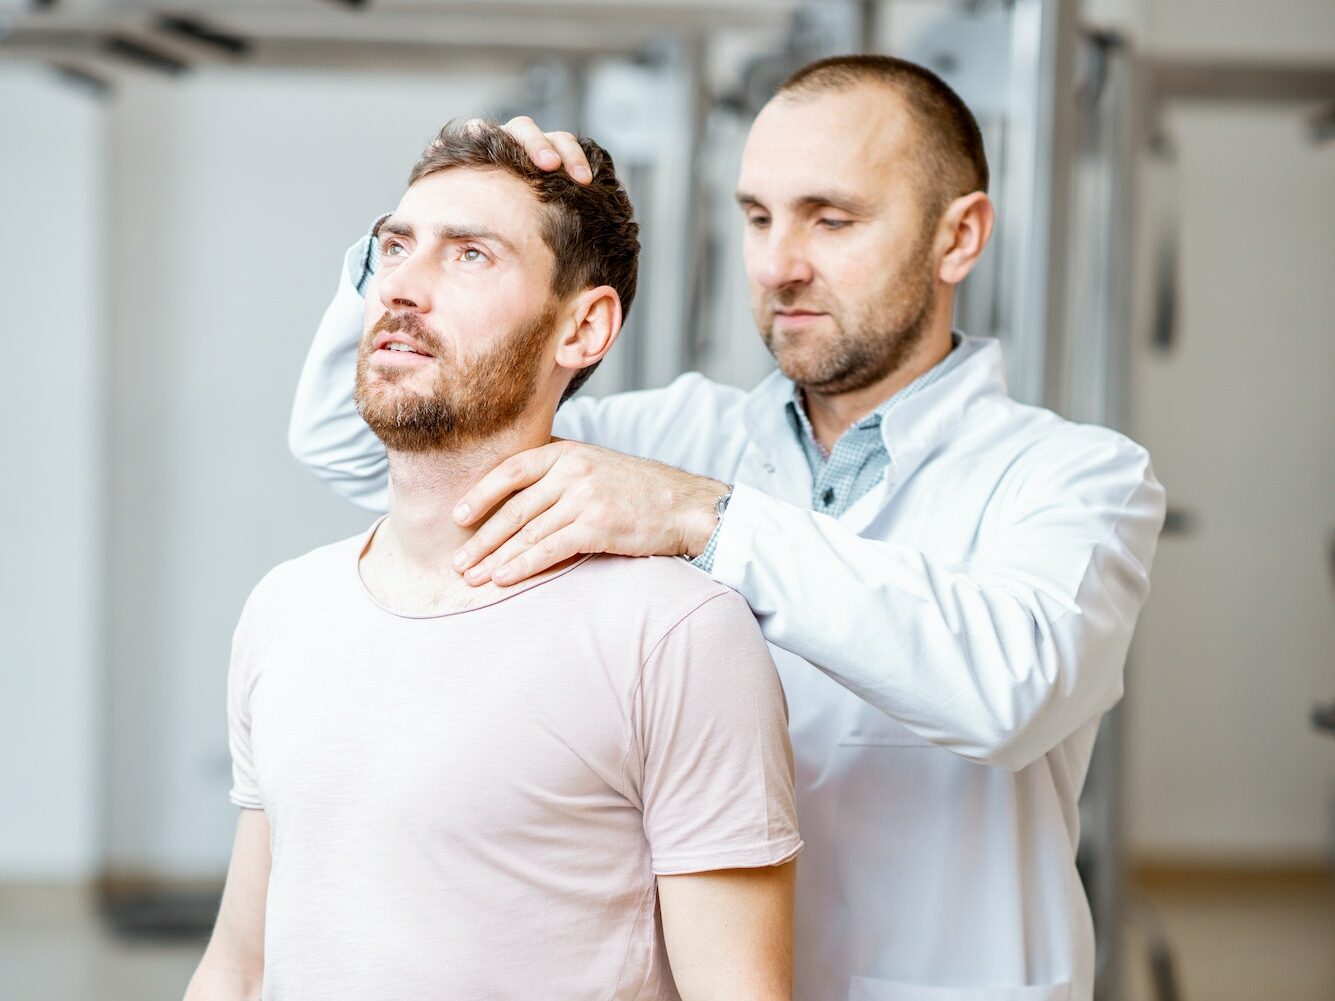 Physiotherapist doing manual treatment to a man